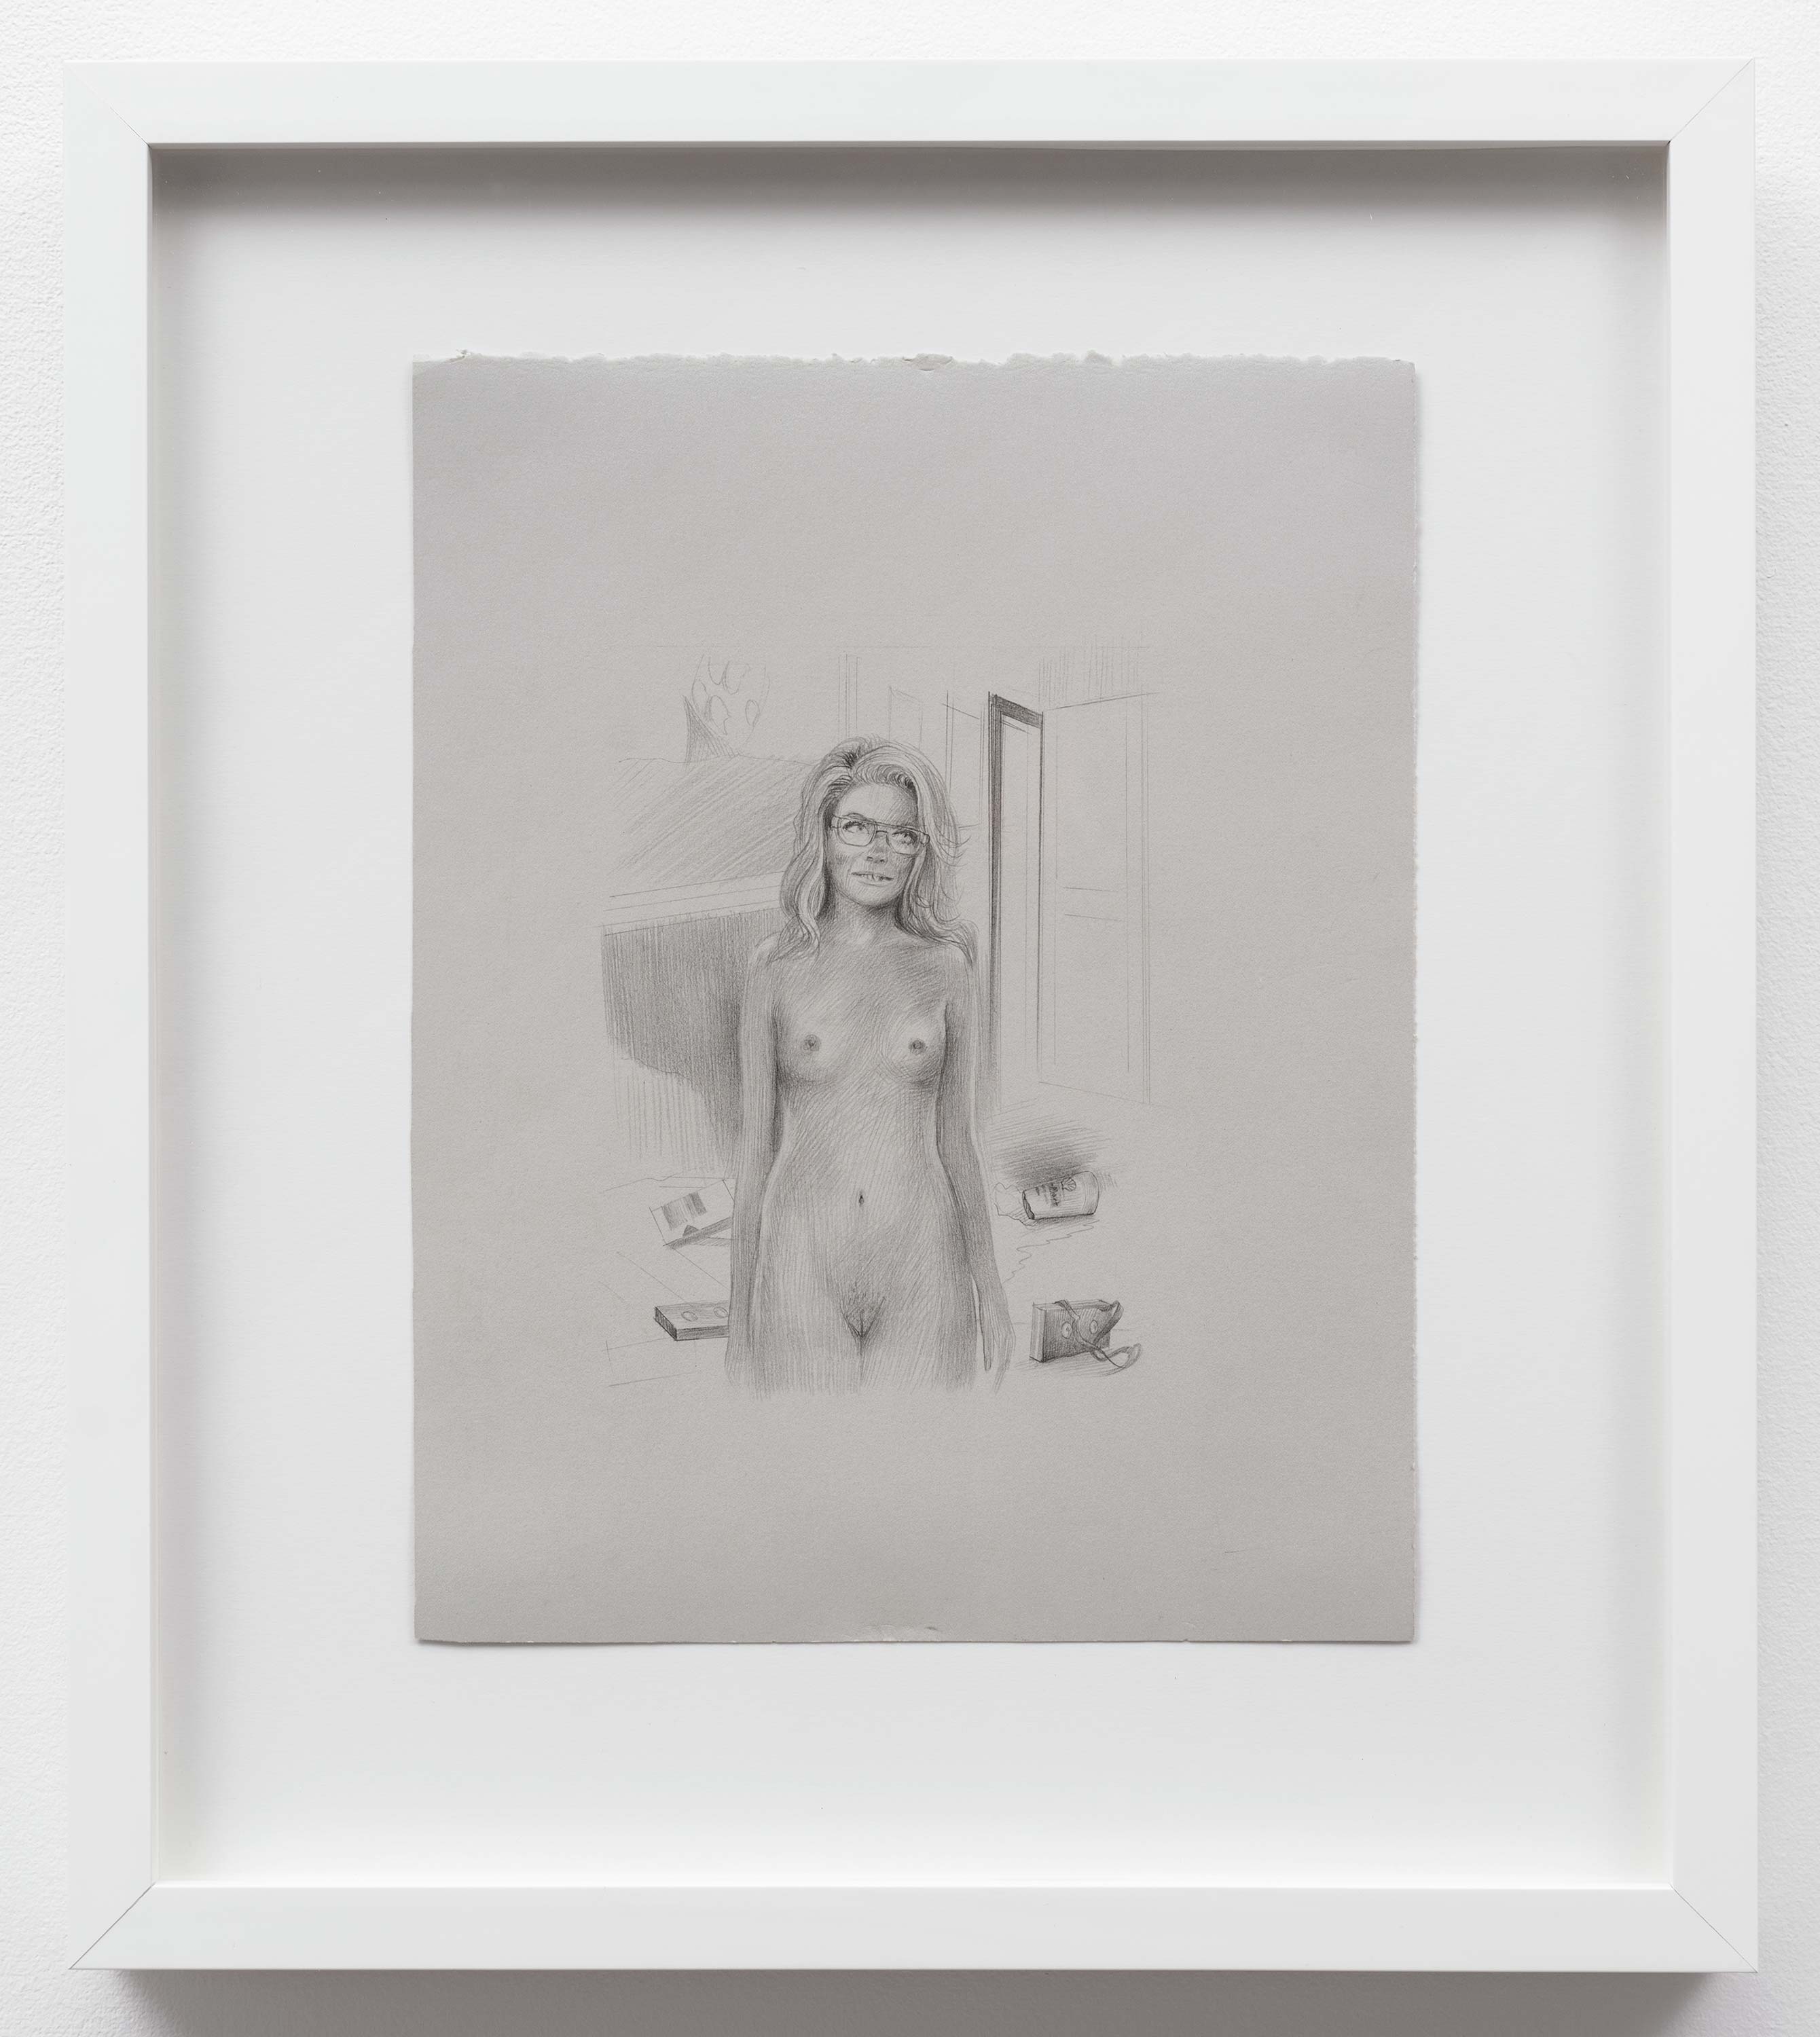 Brandi Twilley<br>Naked in the Living Room with Glasses<br>2014<br>Graphite on gray paper<br>9 x 11.5 (23 x 29 cm)